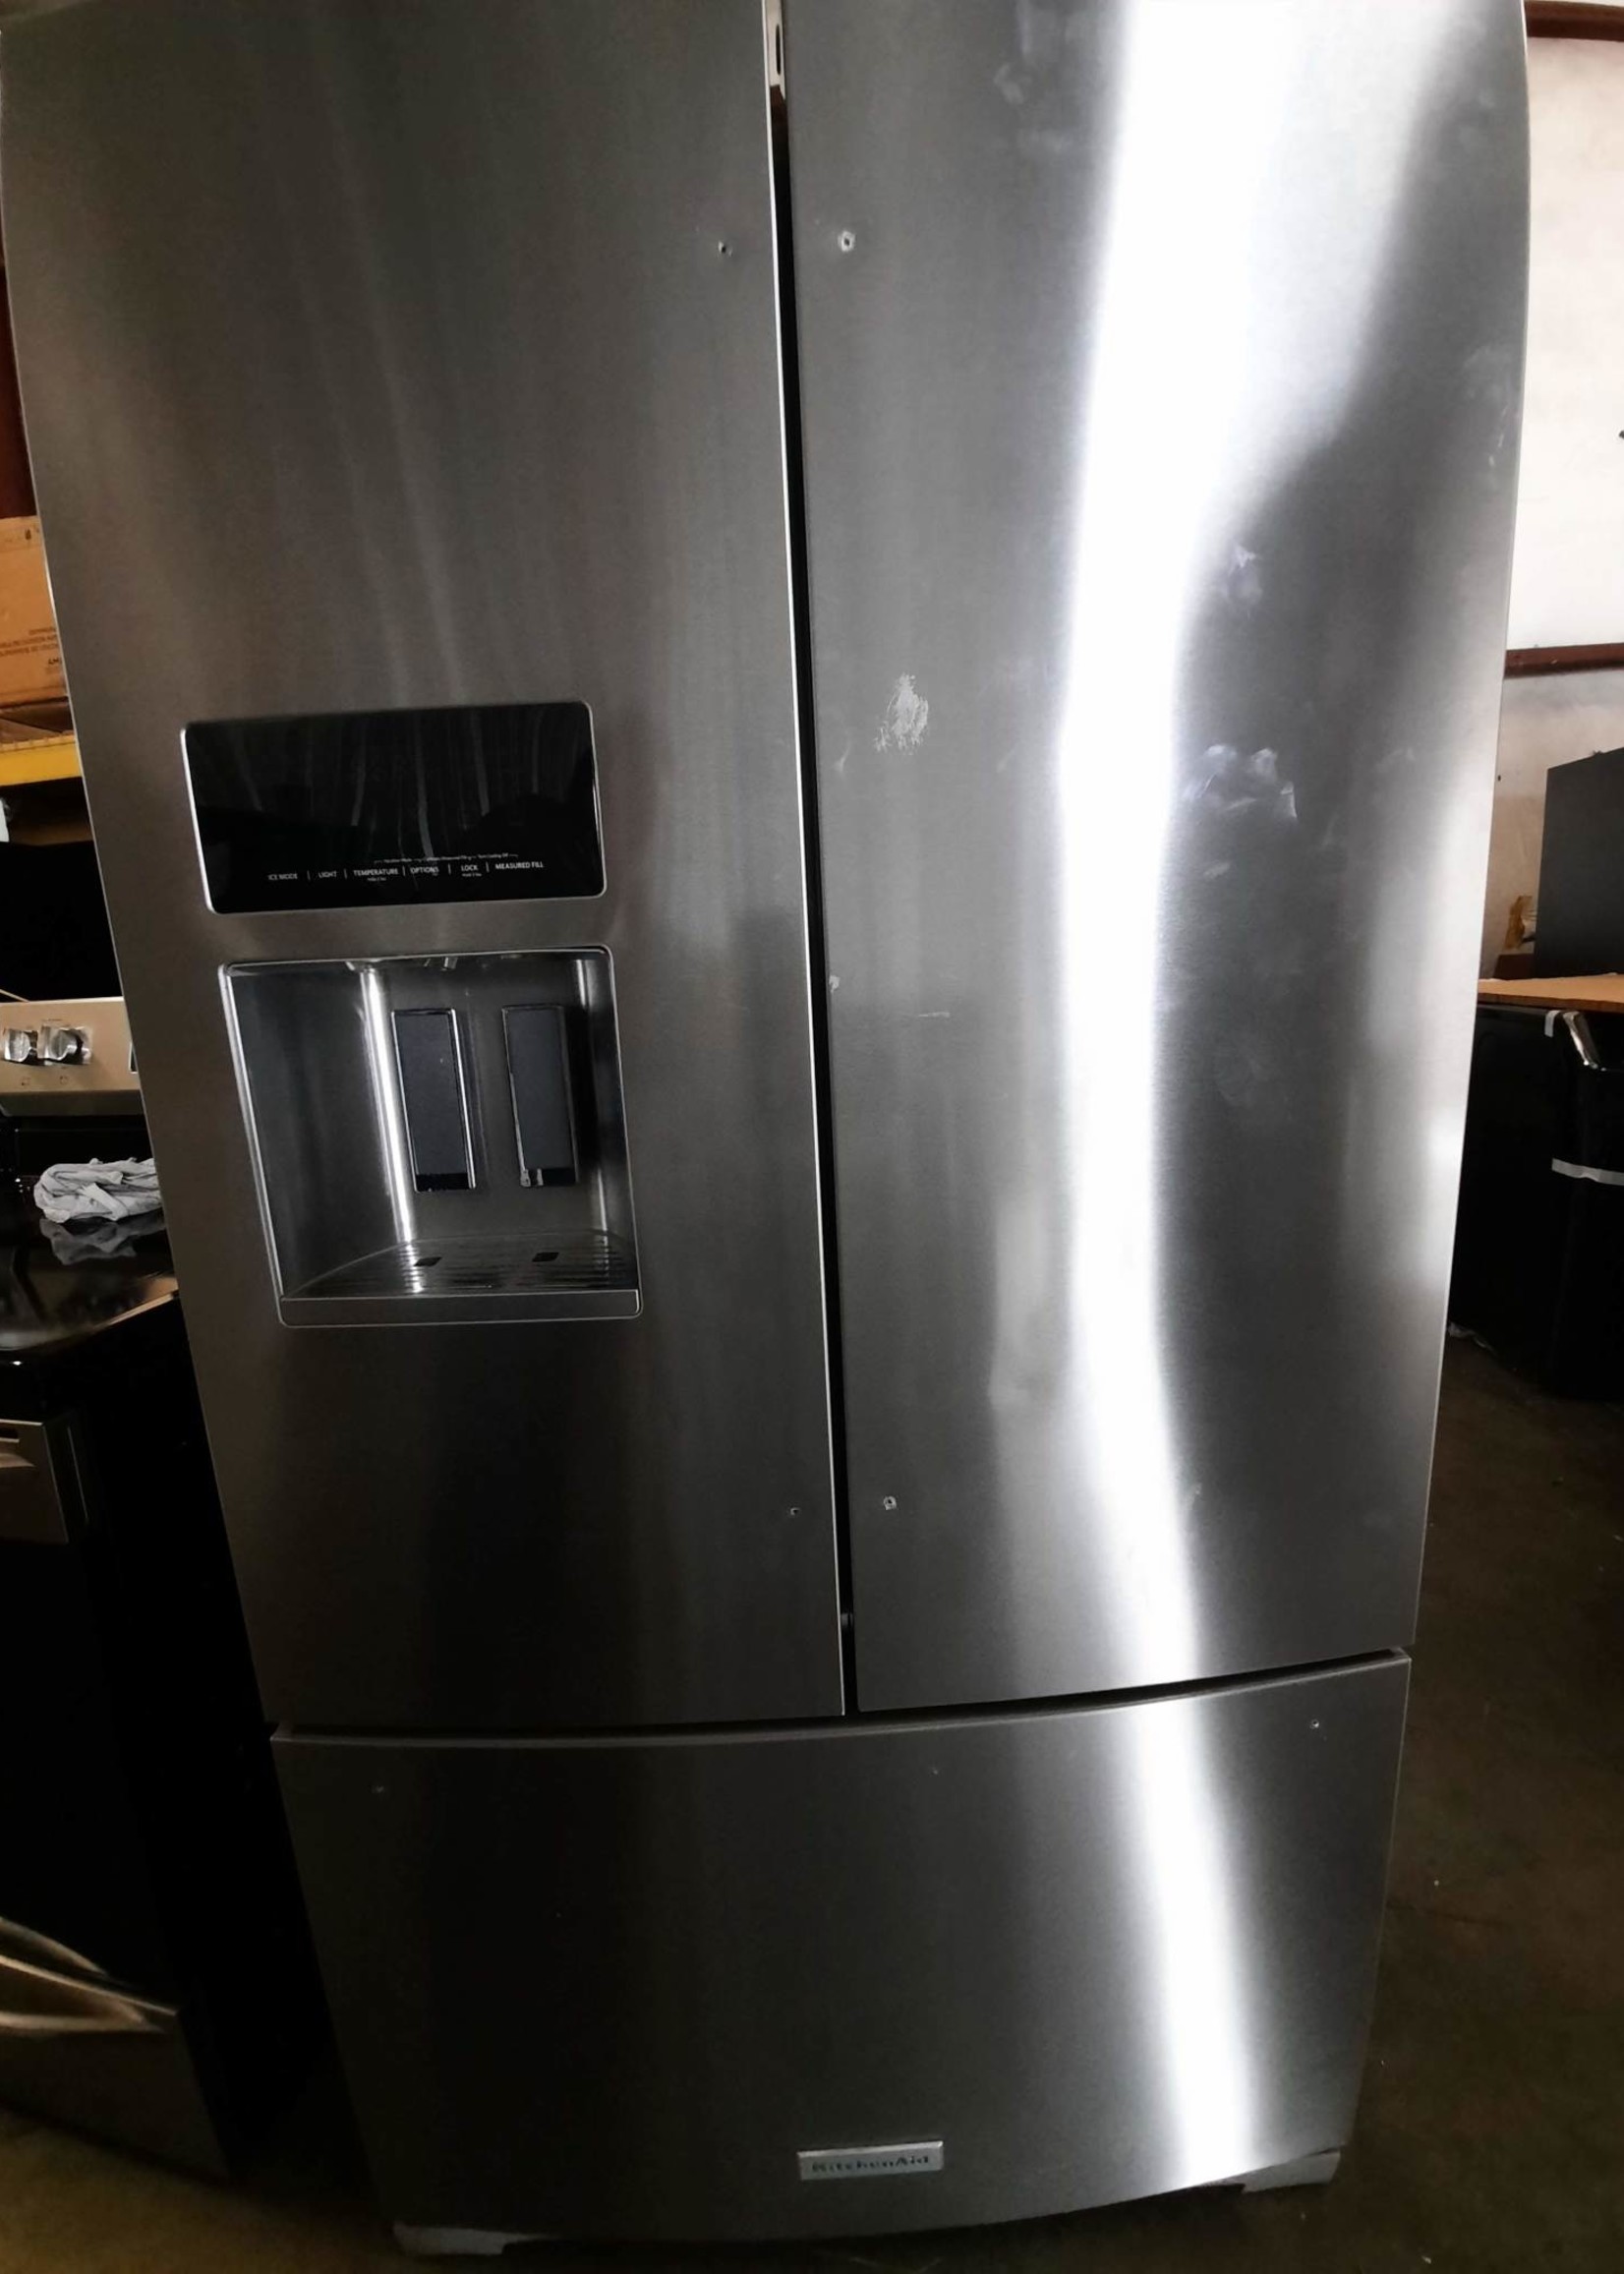 Kitchenaid *Kitchenaid  KRFF507HPS   27 cu. ft. French Door Refrigerator in PrintShield Stainless with Exterior Ice and Water